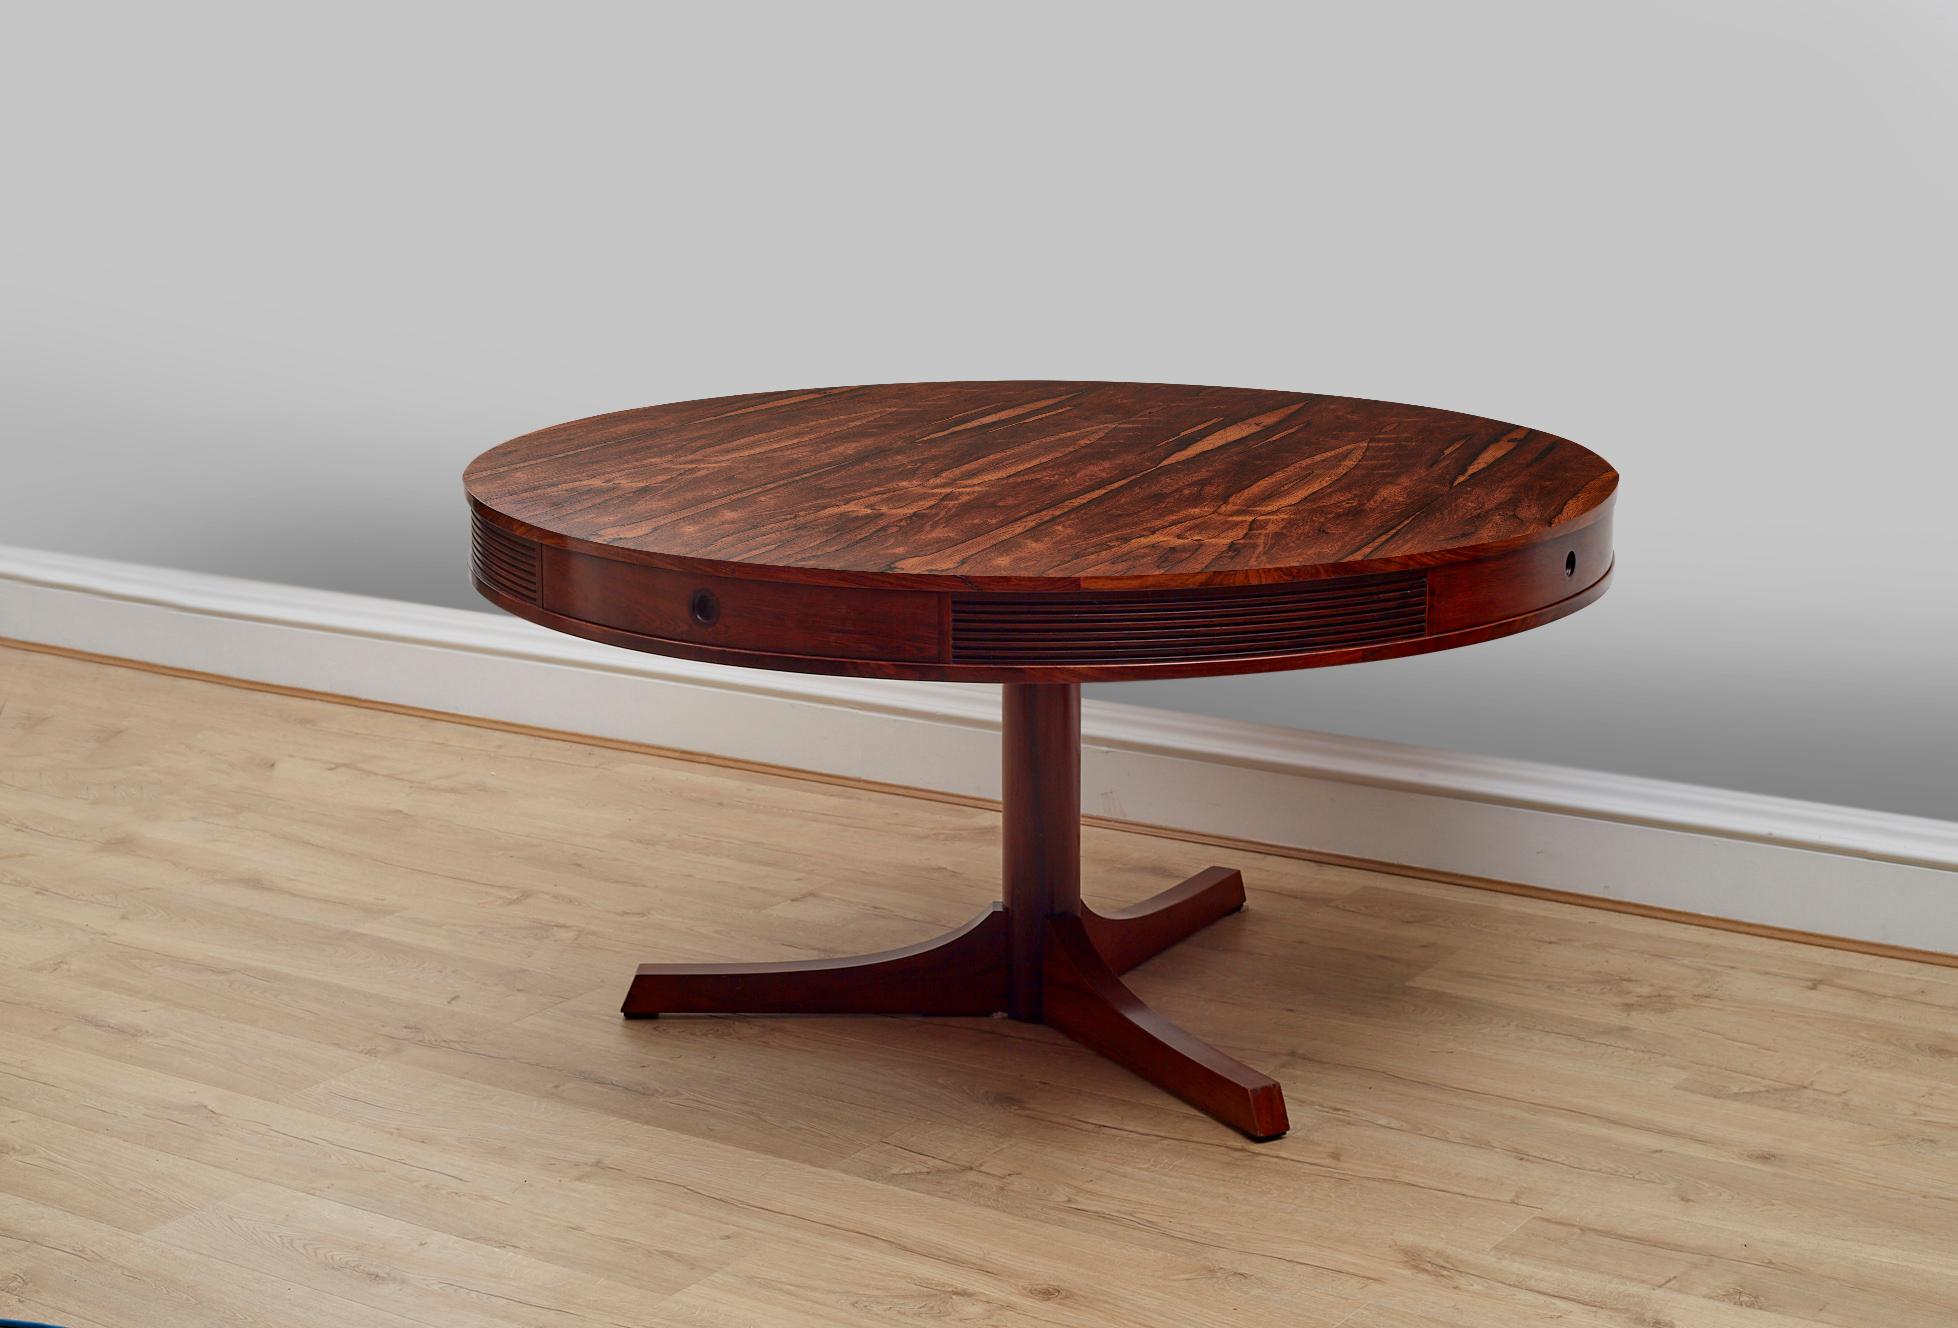 A Superb Rosewood drum dining table designed by Robert Heritage for Archie Shine, called ‘The Bridgford’ dining table. Made in England in the 1960's. 

One of the best examples we’ve seen with a truly stunning veneer pattern and deep Rosewood